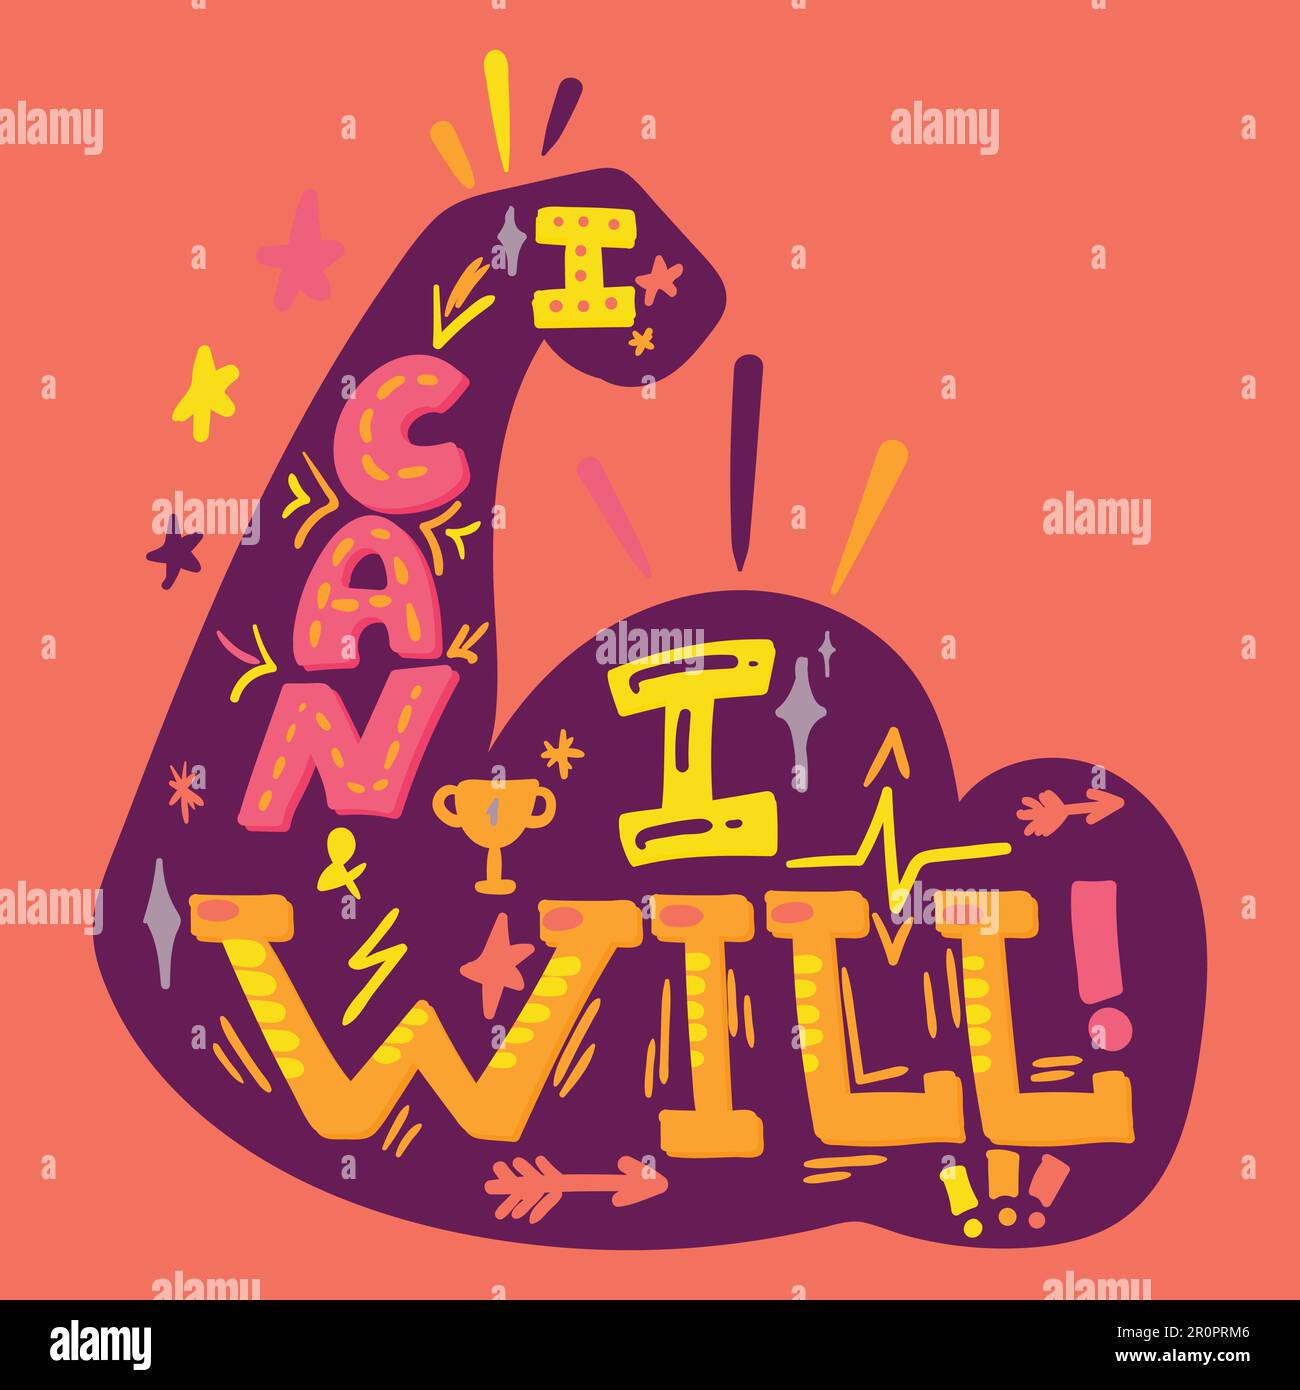 I Can And I Will. Sport Motivation. Hipster flat super slogan. Inspire text design.Vector Stock Vector